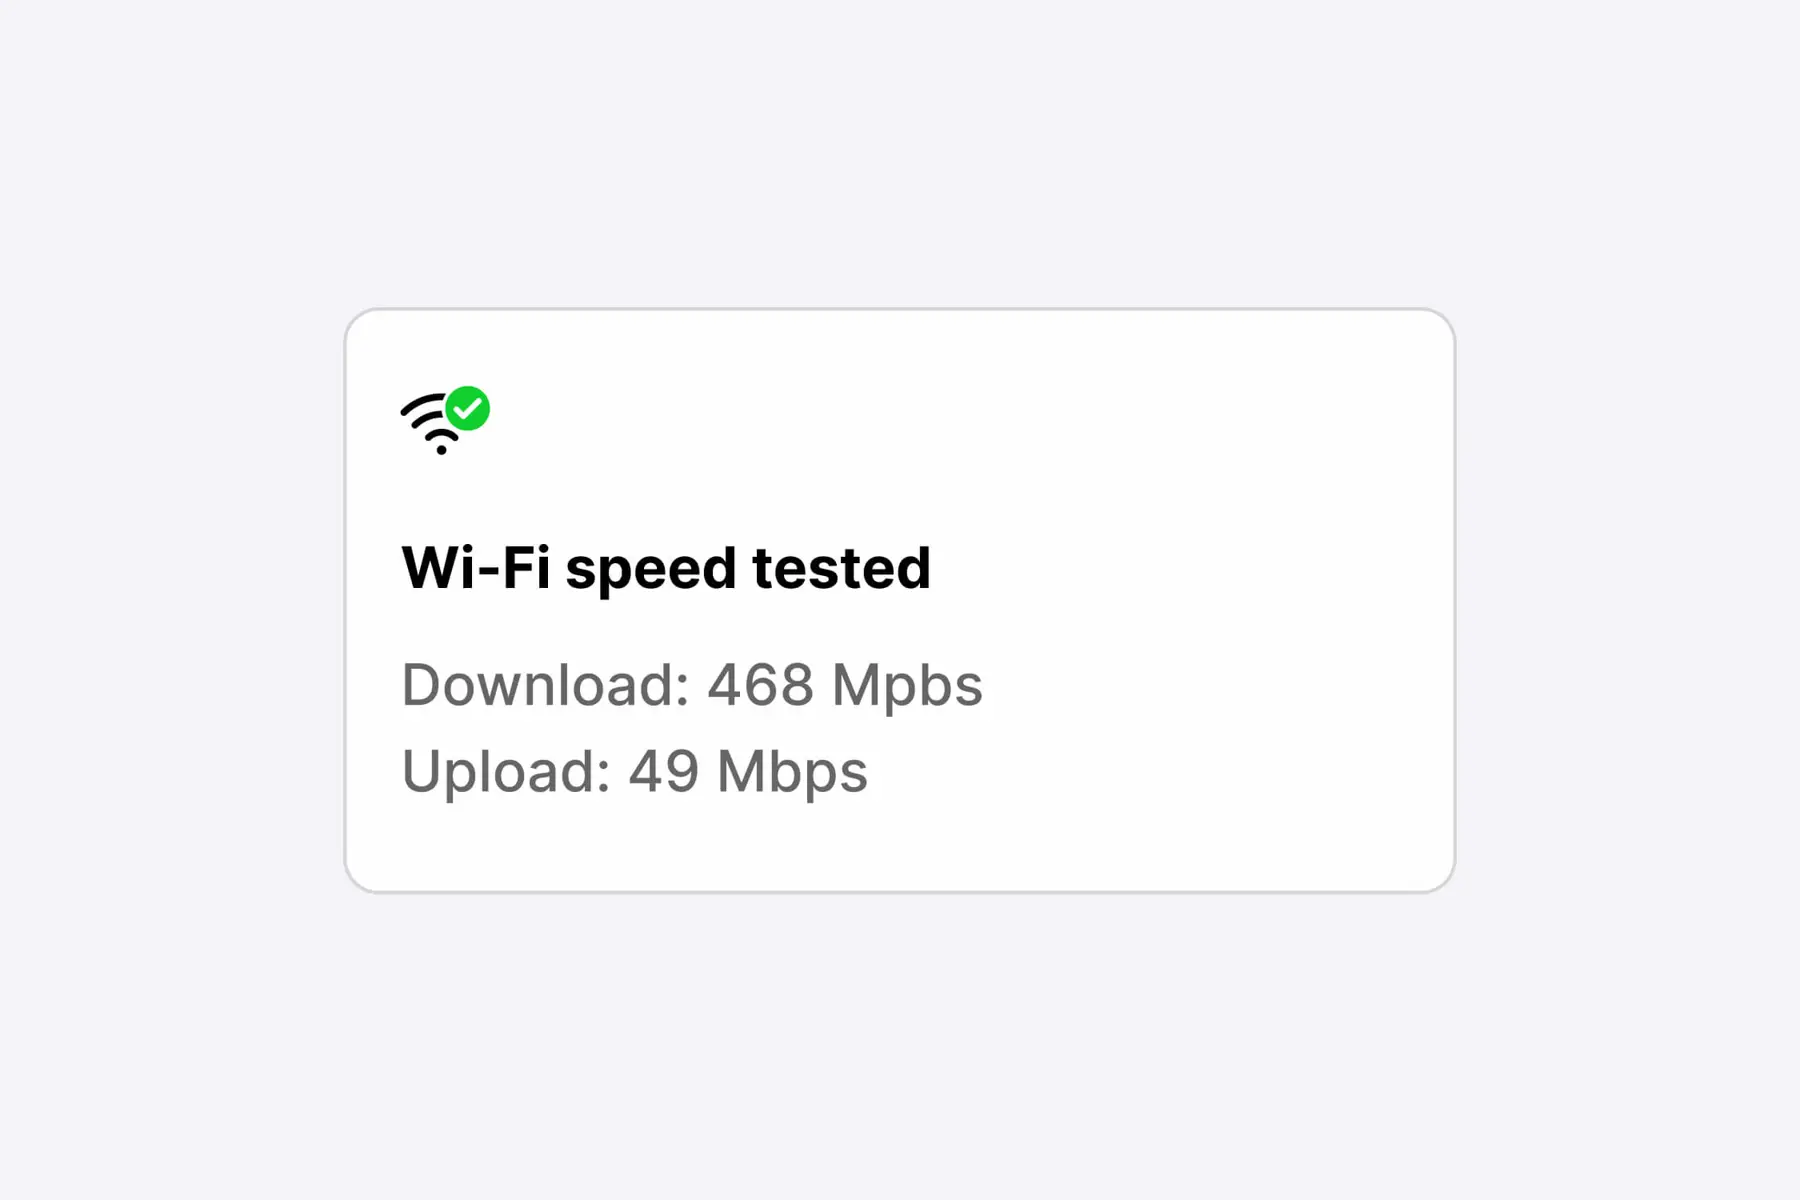 swaphouse wifi speed tested results